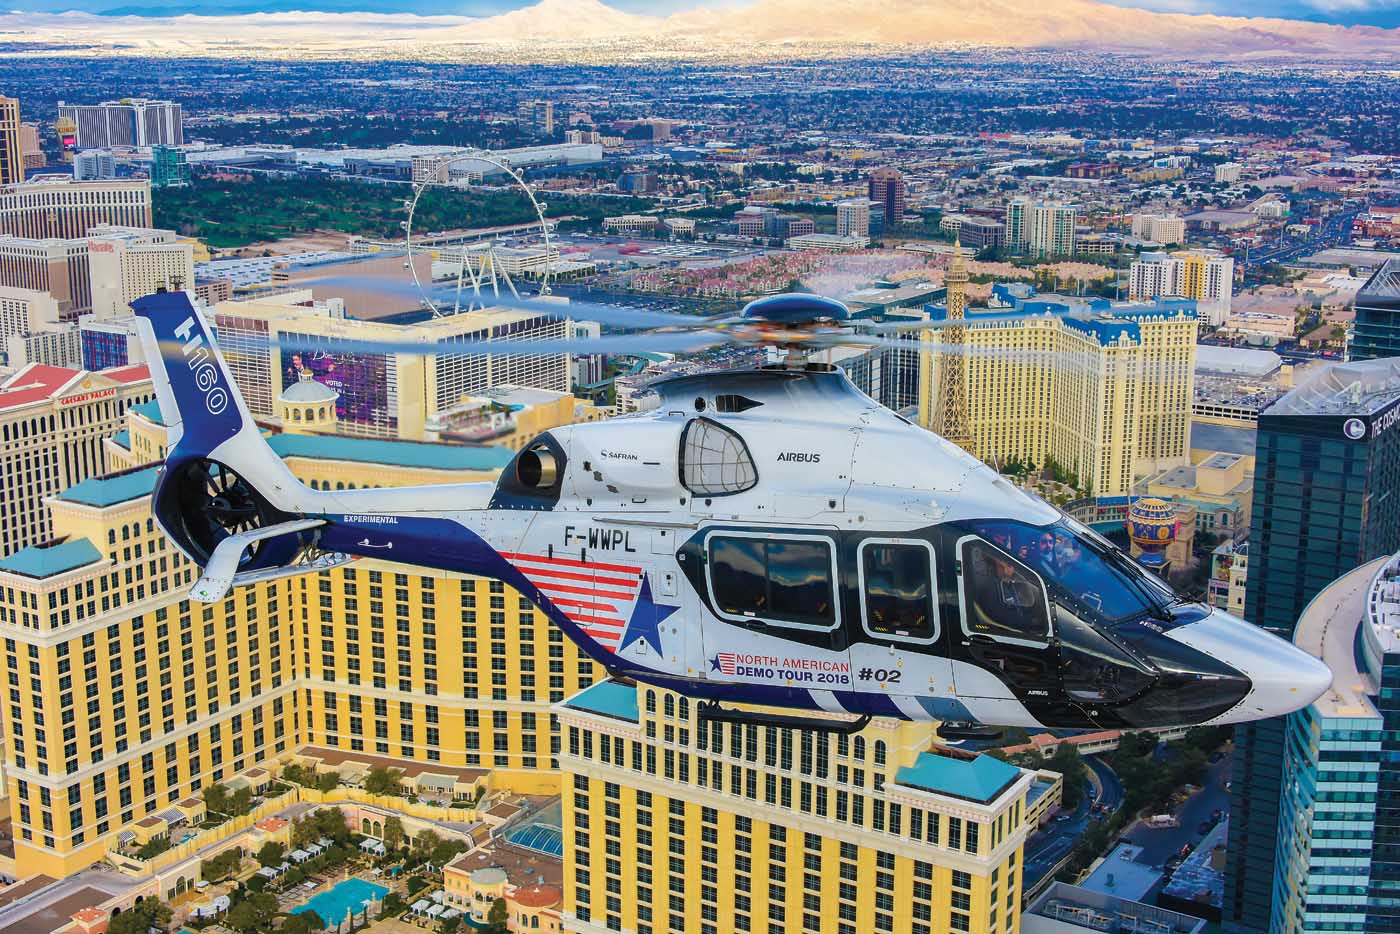 Cruising the Las Vegas Strip in style. The H160's slow-flight deck angle is comfortable with plenty of visibility. Mike Reyno Photo 